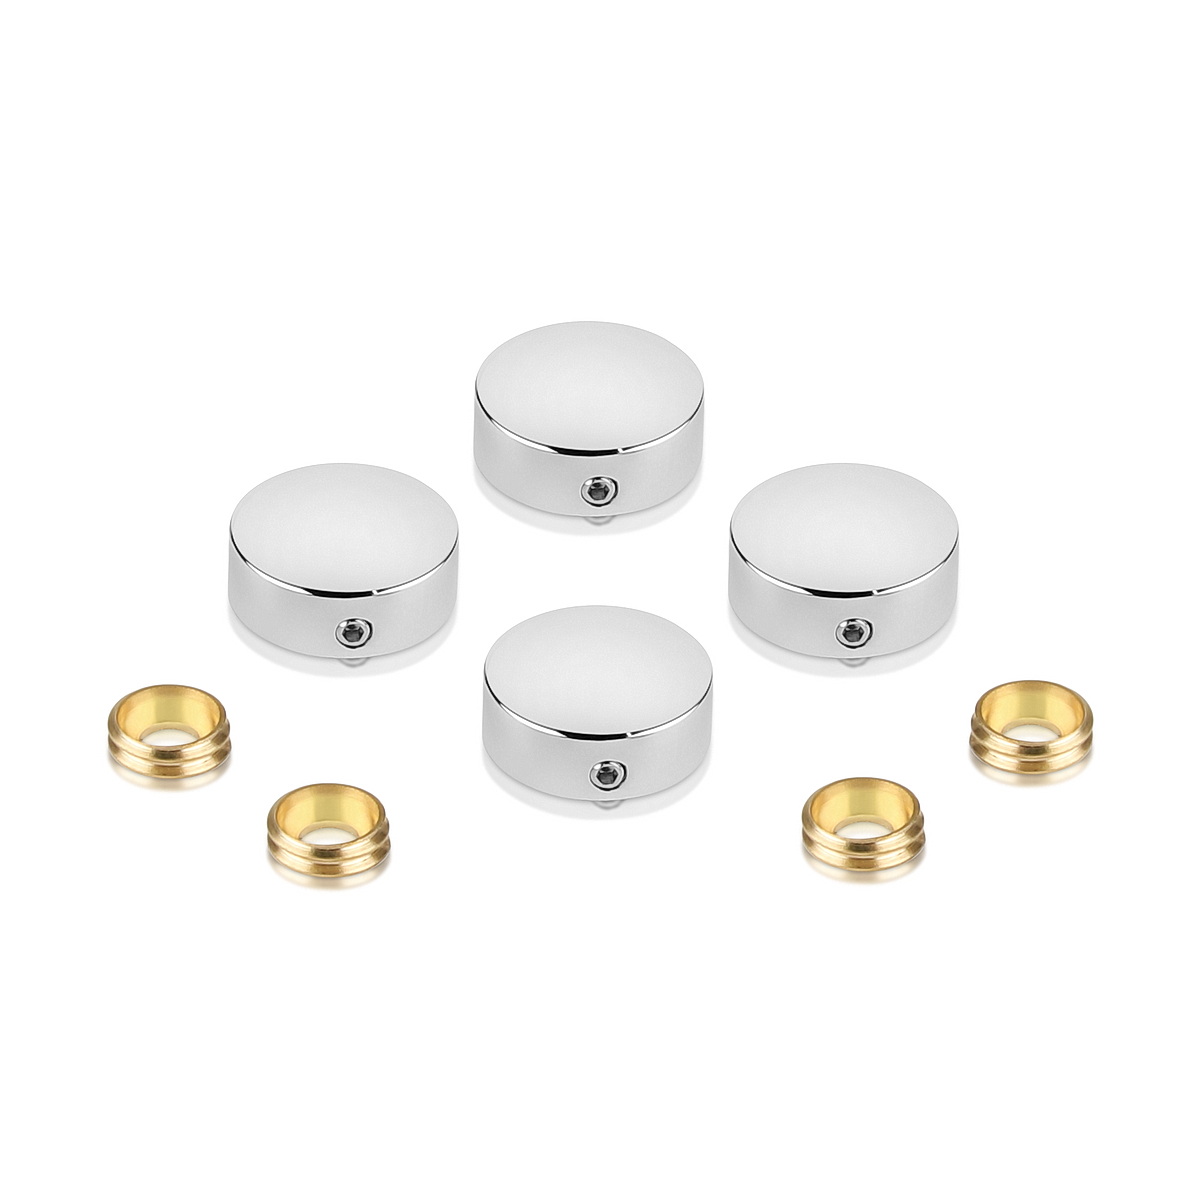 Set of 4 Locking Screw Cover Diameter 11/16'', Polished Stainless Steel Finish (Indoor or Outdoor)